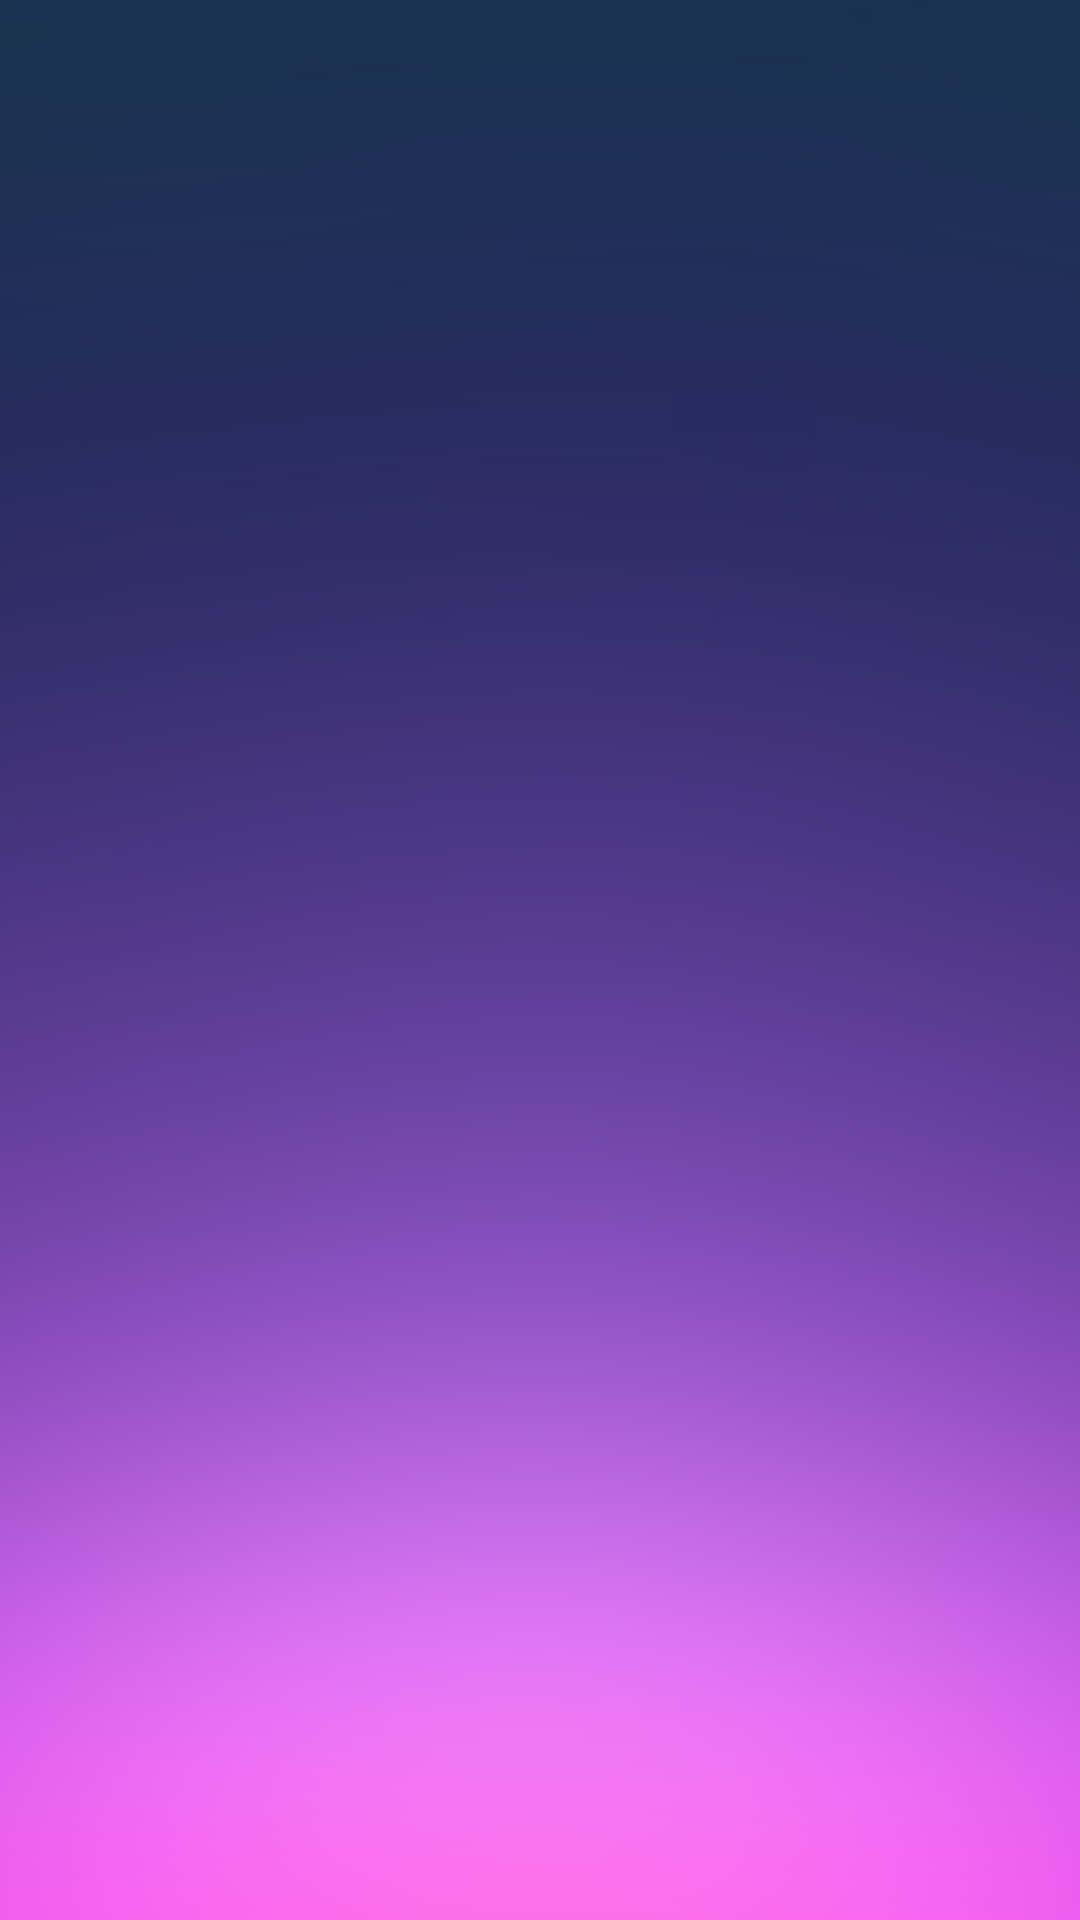 A vibrant purple and pink background full of life and energy